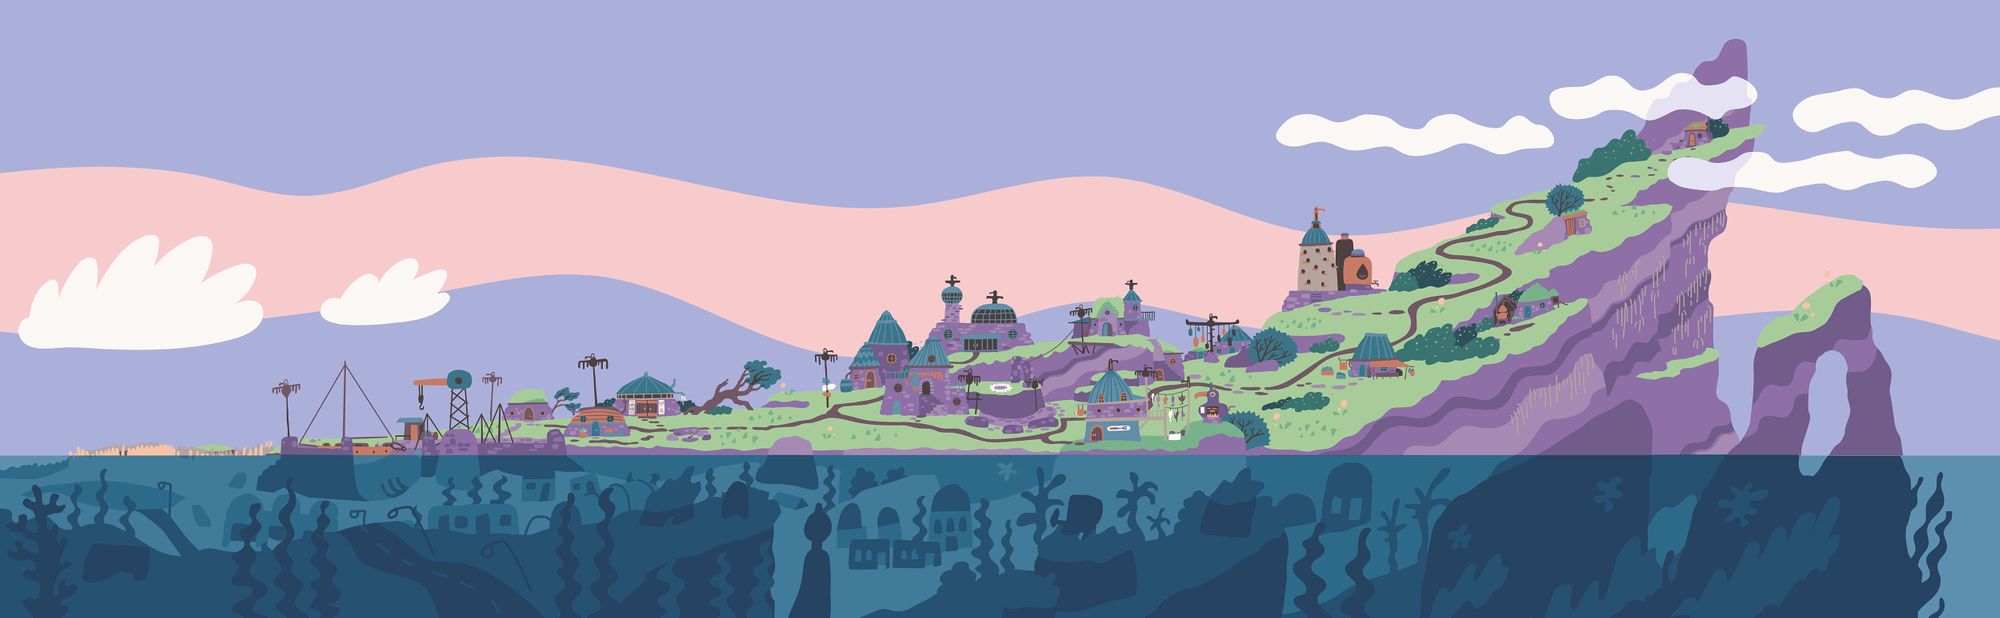 A piece of vector based illustrative-style art which shows an island which rises out of marshes on the left into a tall cliff on the right, with buildings present across.